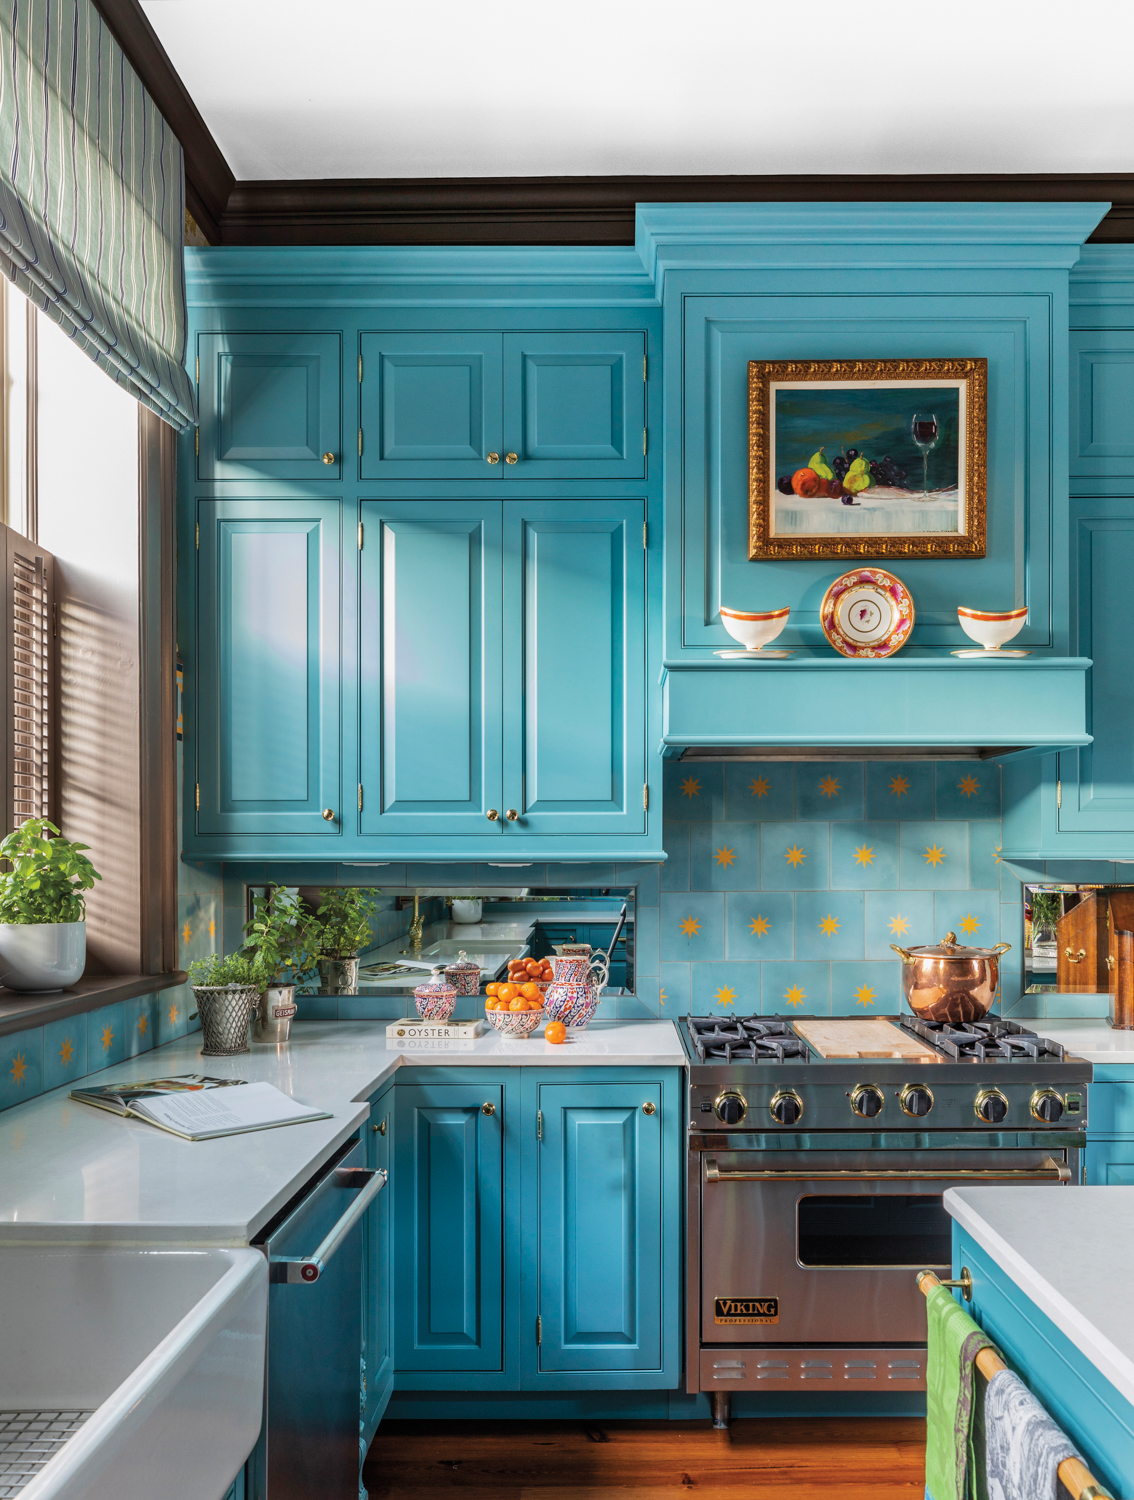 Traditional kitchen with turquoise cabinetry, a still life painting and start-patterned backsplash tile